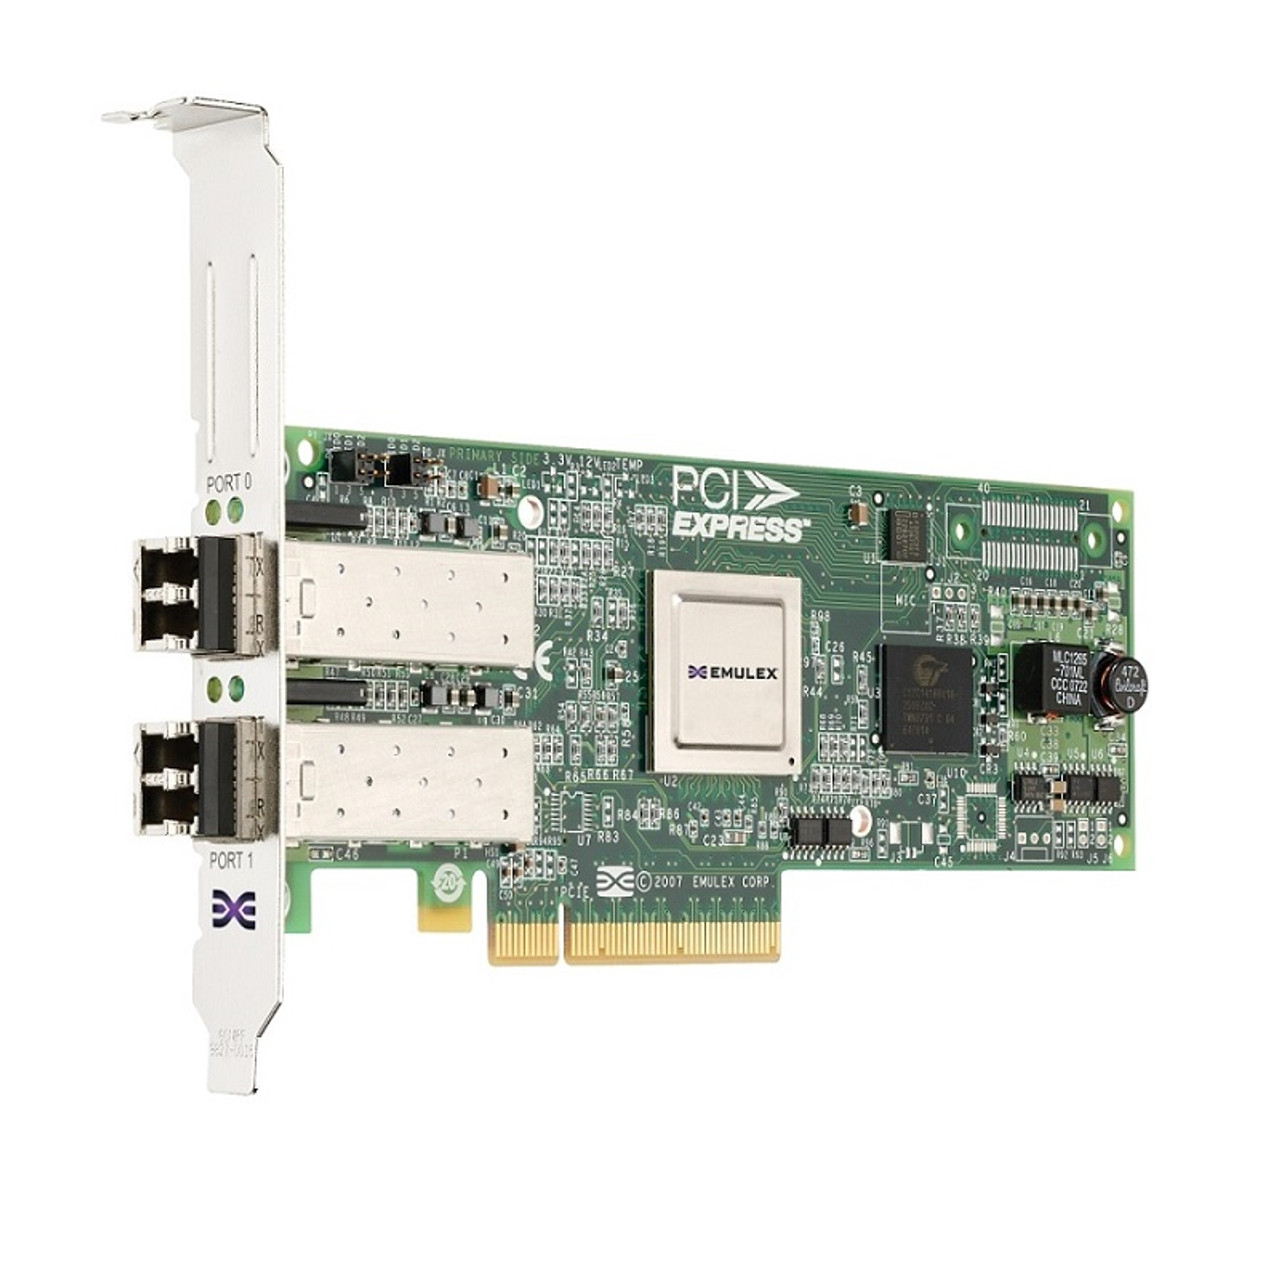 00JY830 - IBM VFA5 2x10GbE SFP+ Adapter by Emulex for System x